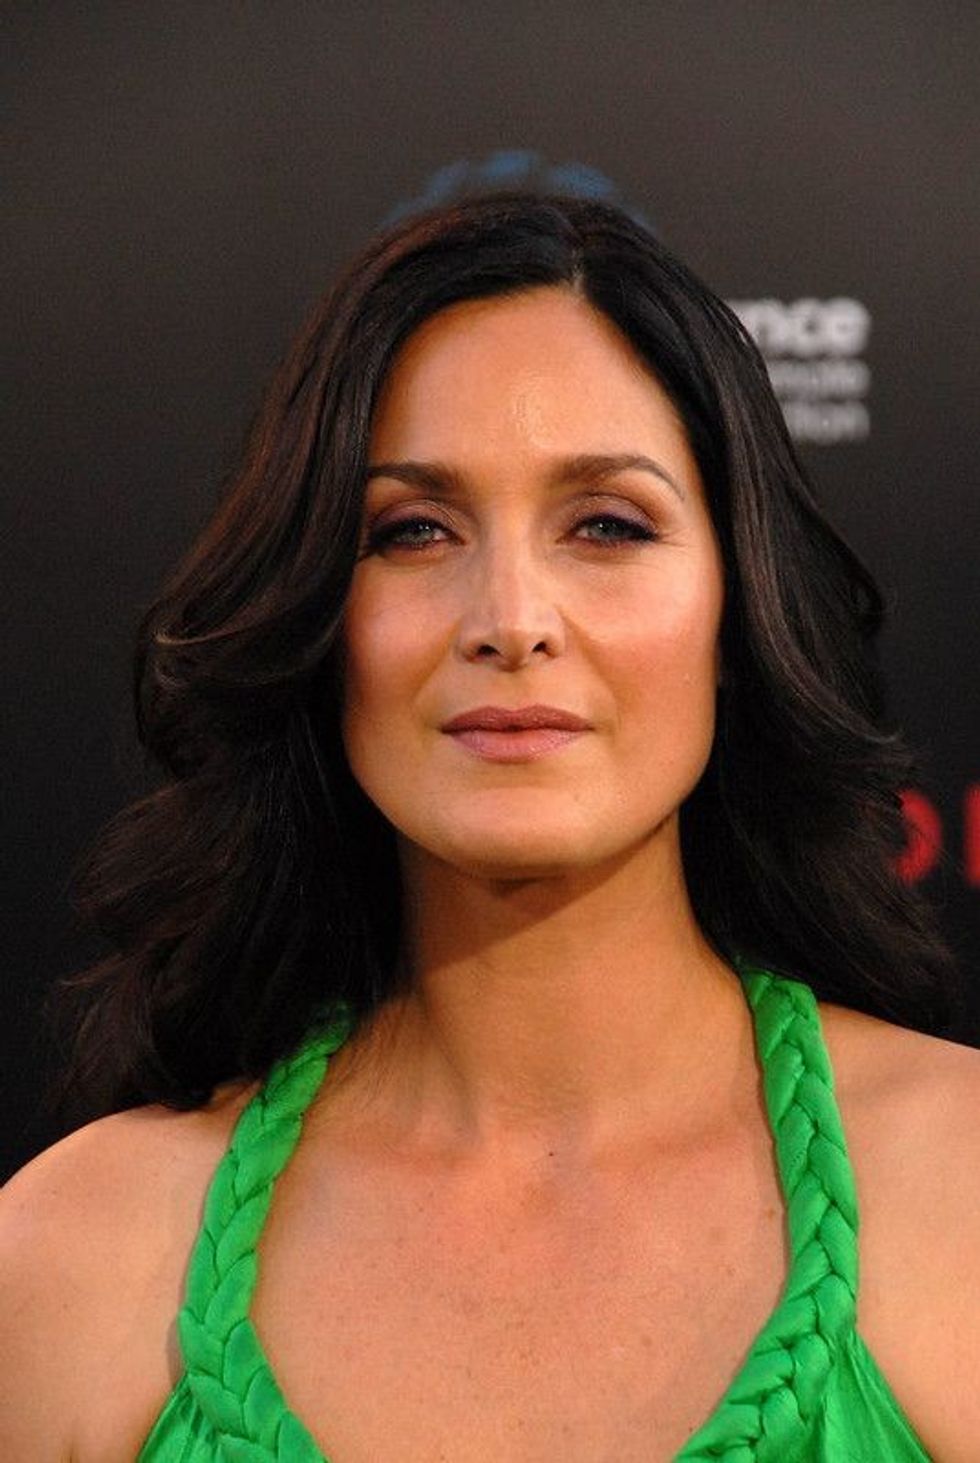 An image of Carrie-Anne Moss on the red carpet.